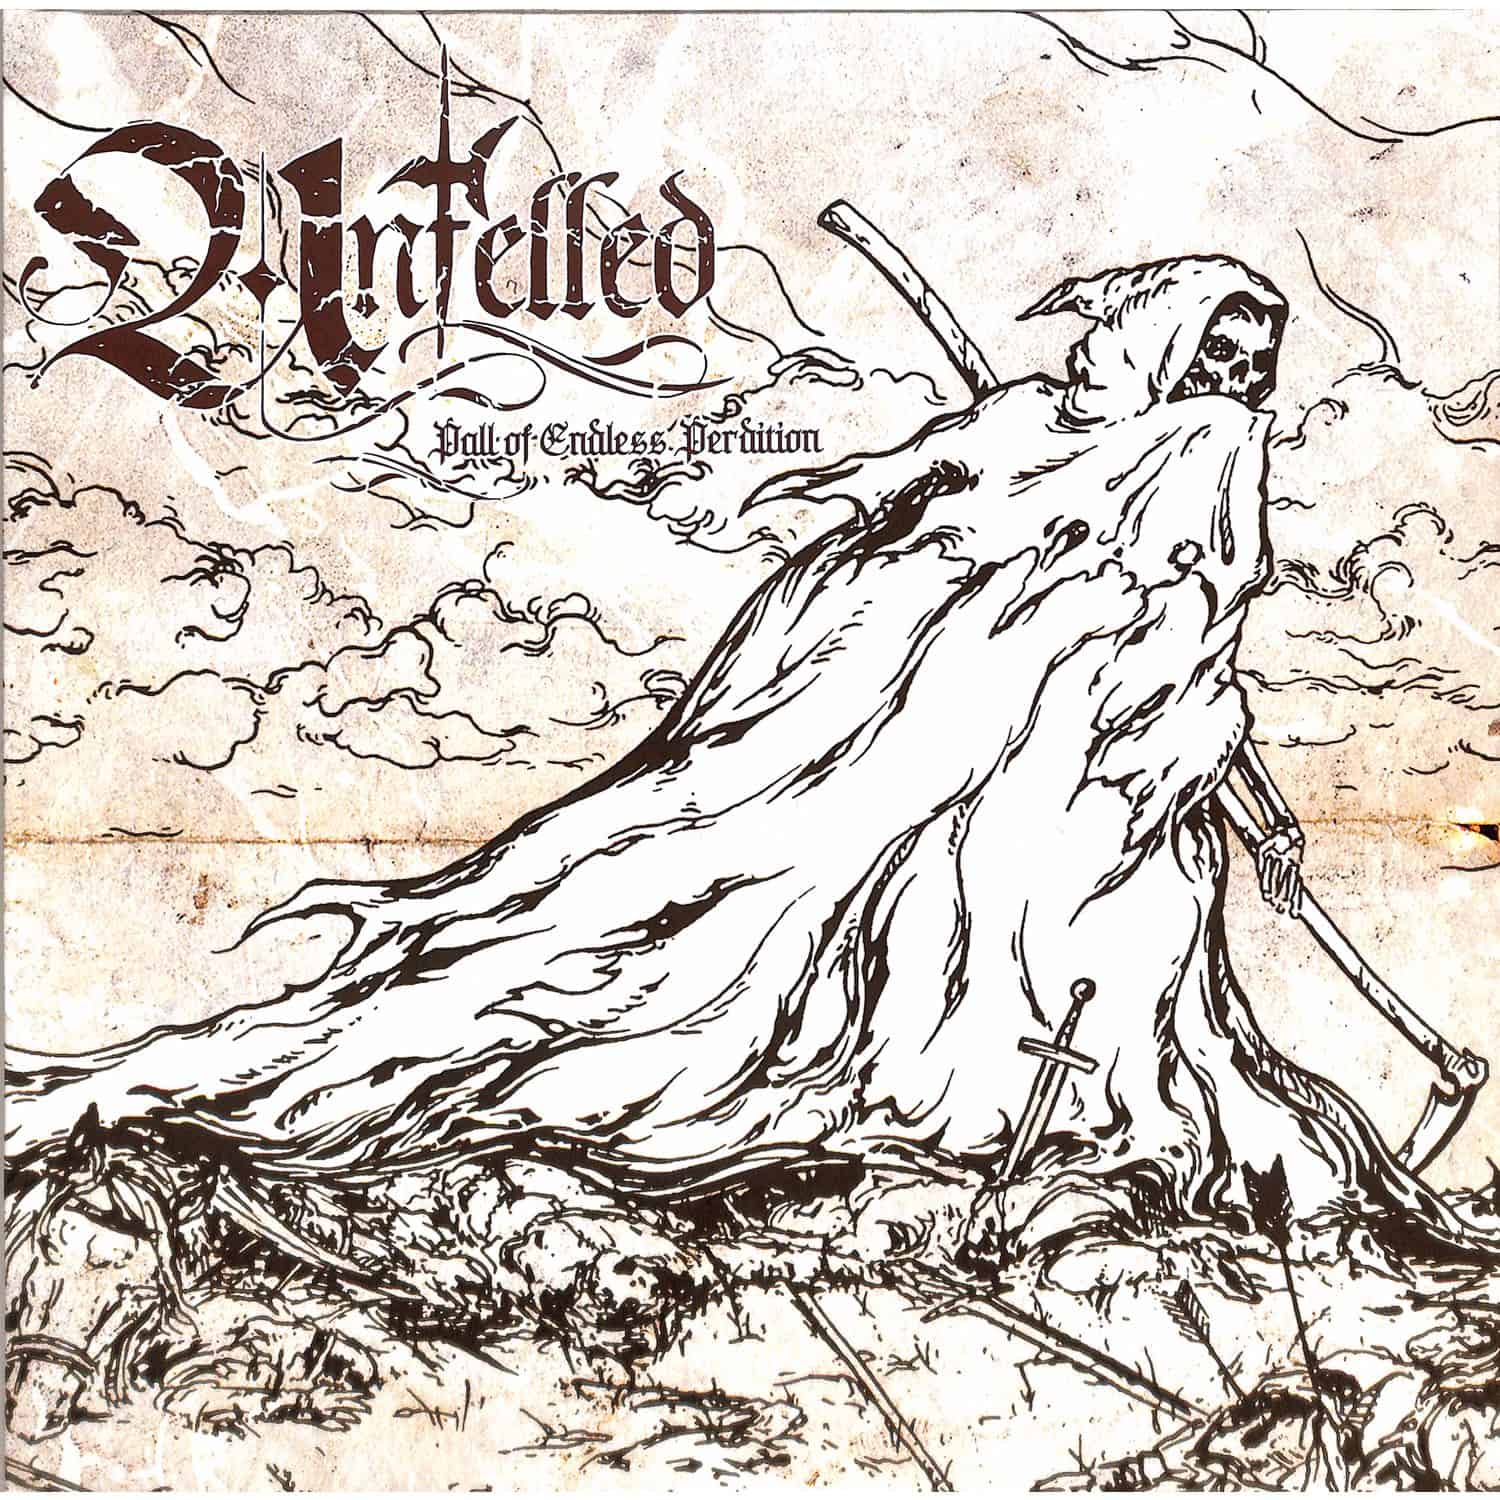 Unfelled - PALL OF ENDLESS PERDITION 